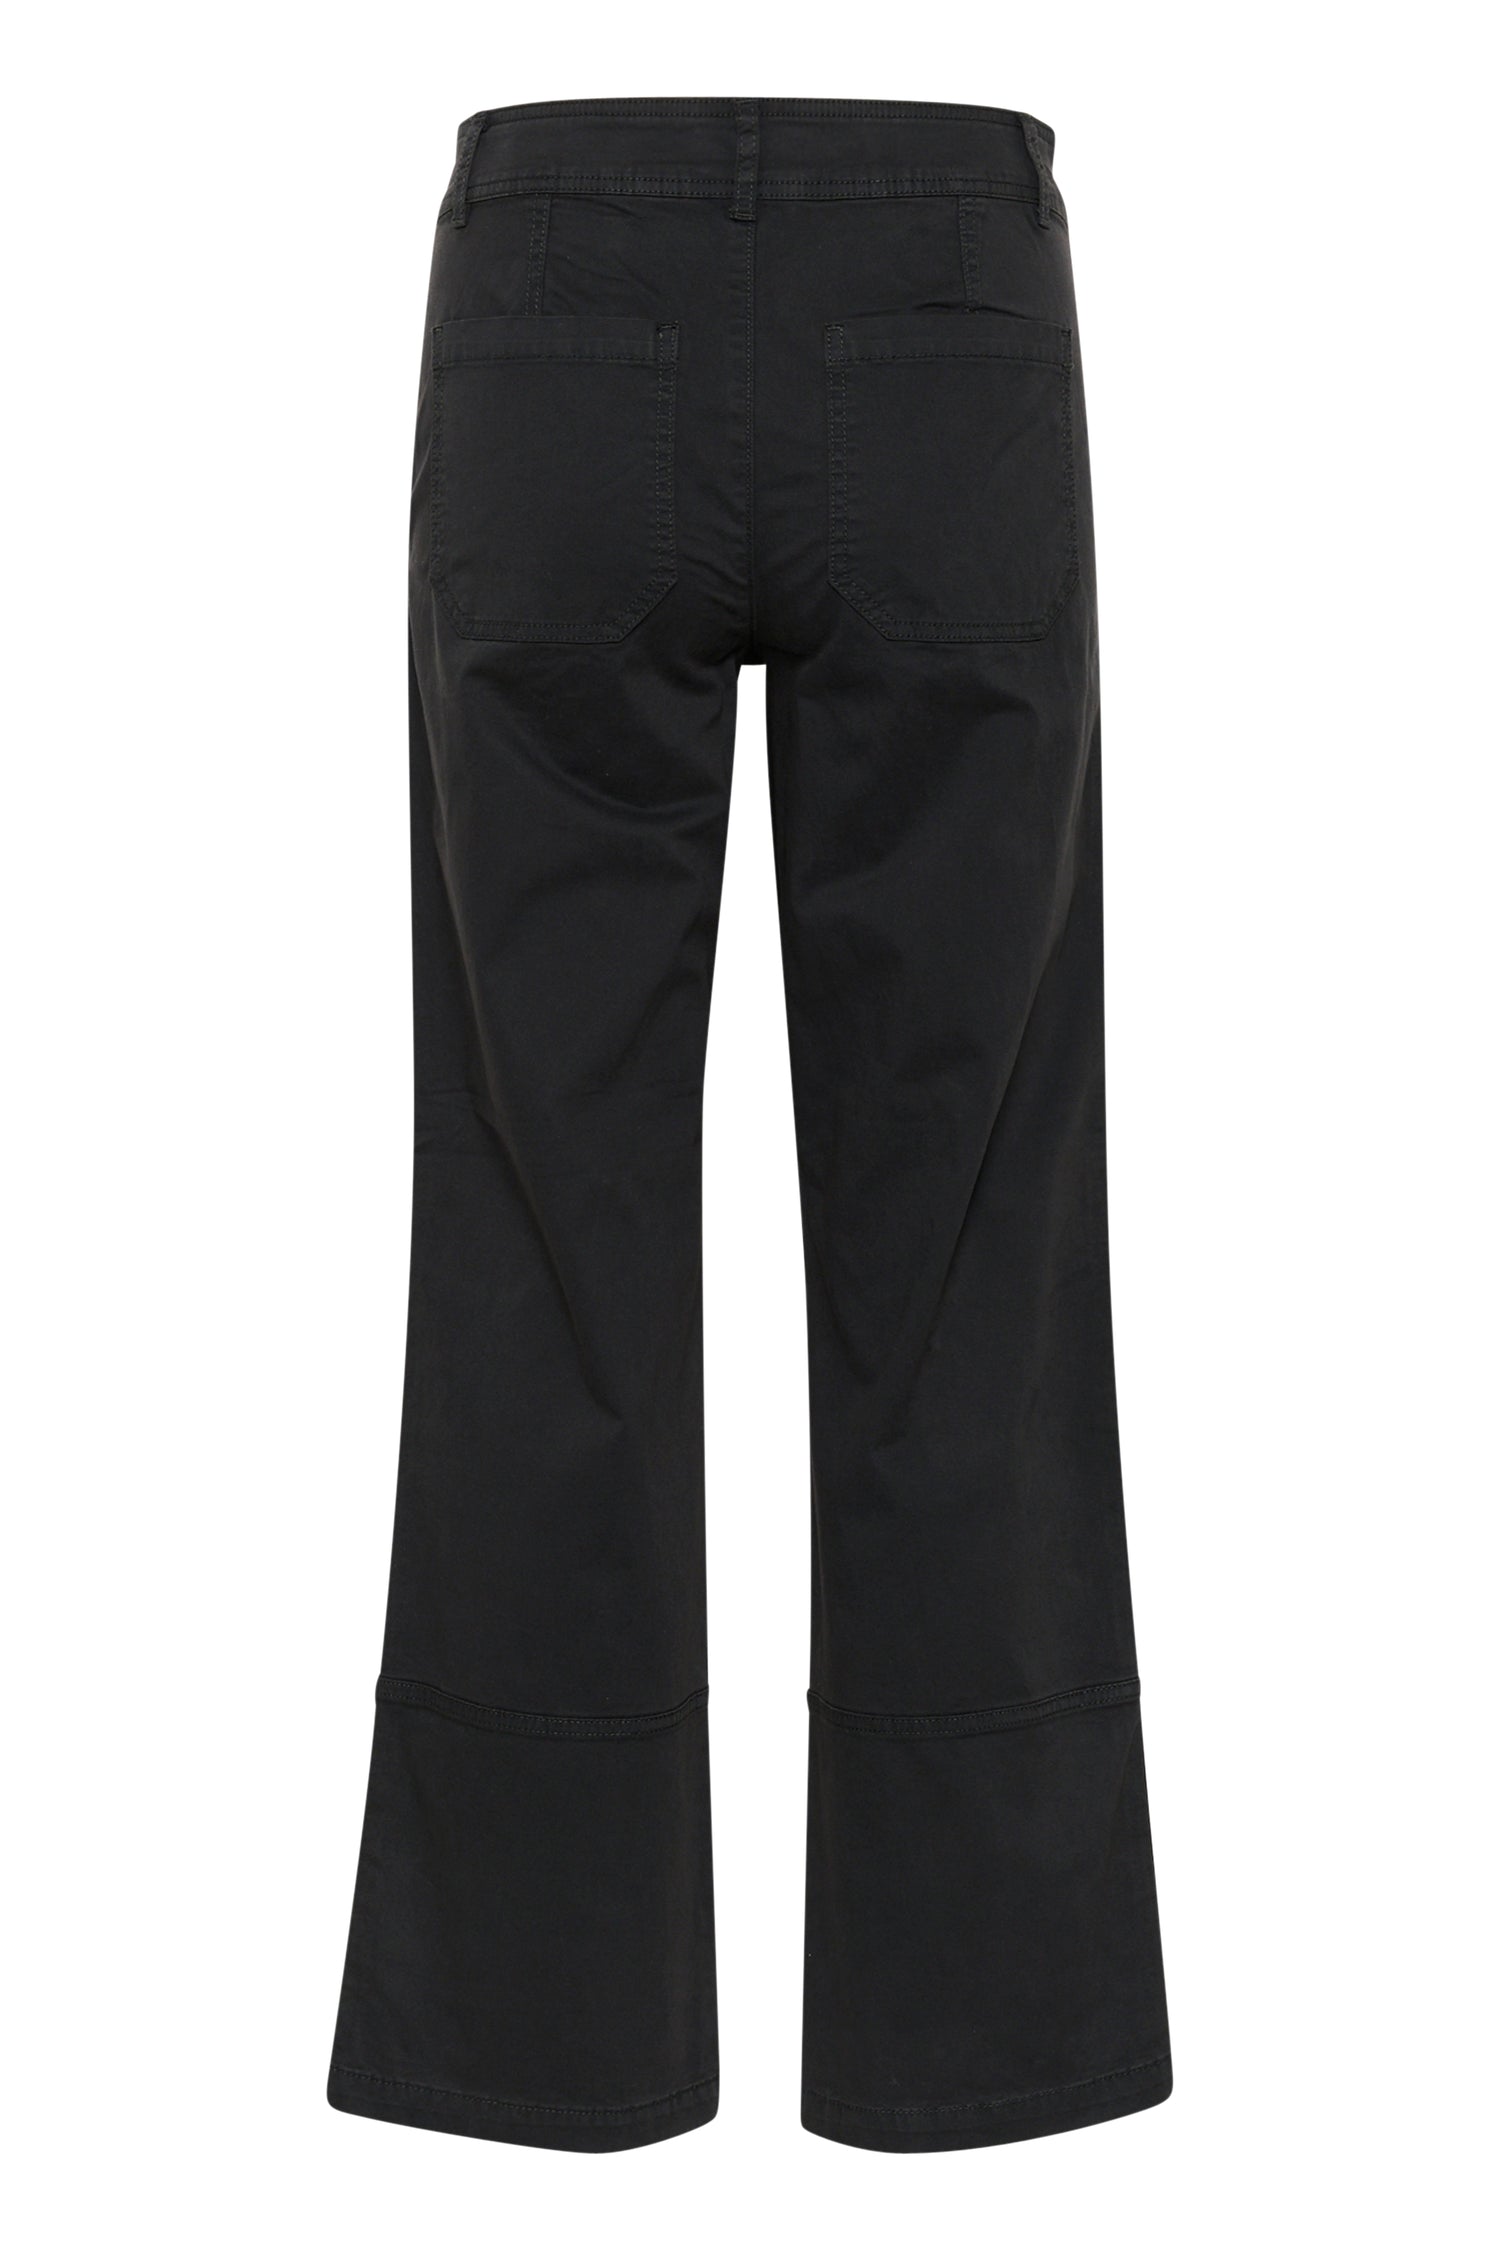 Part Two Cresta Trousers